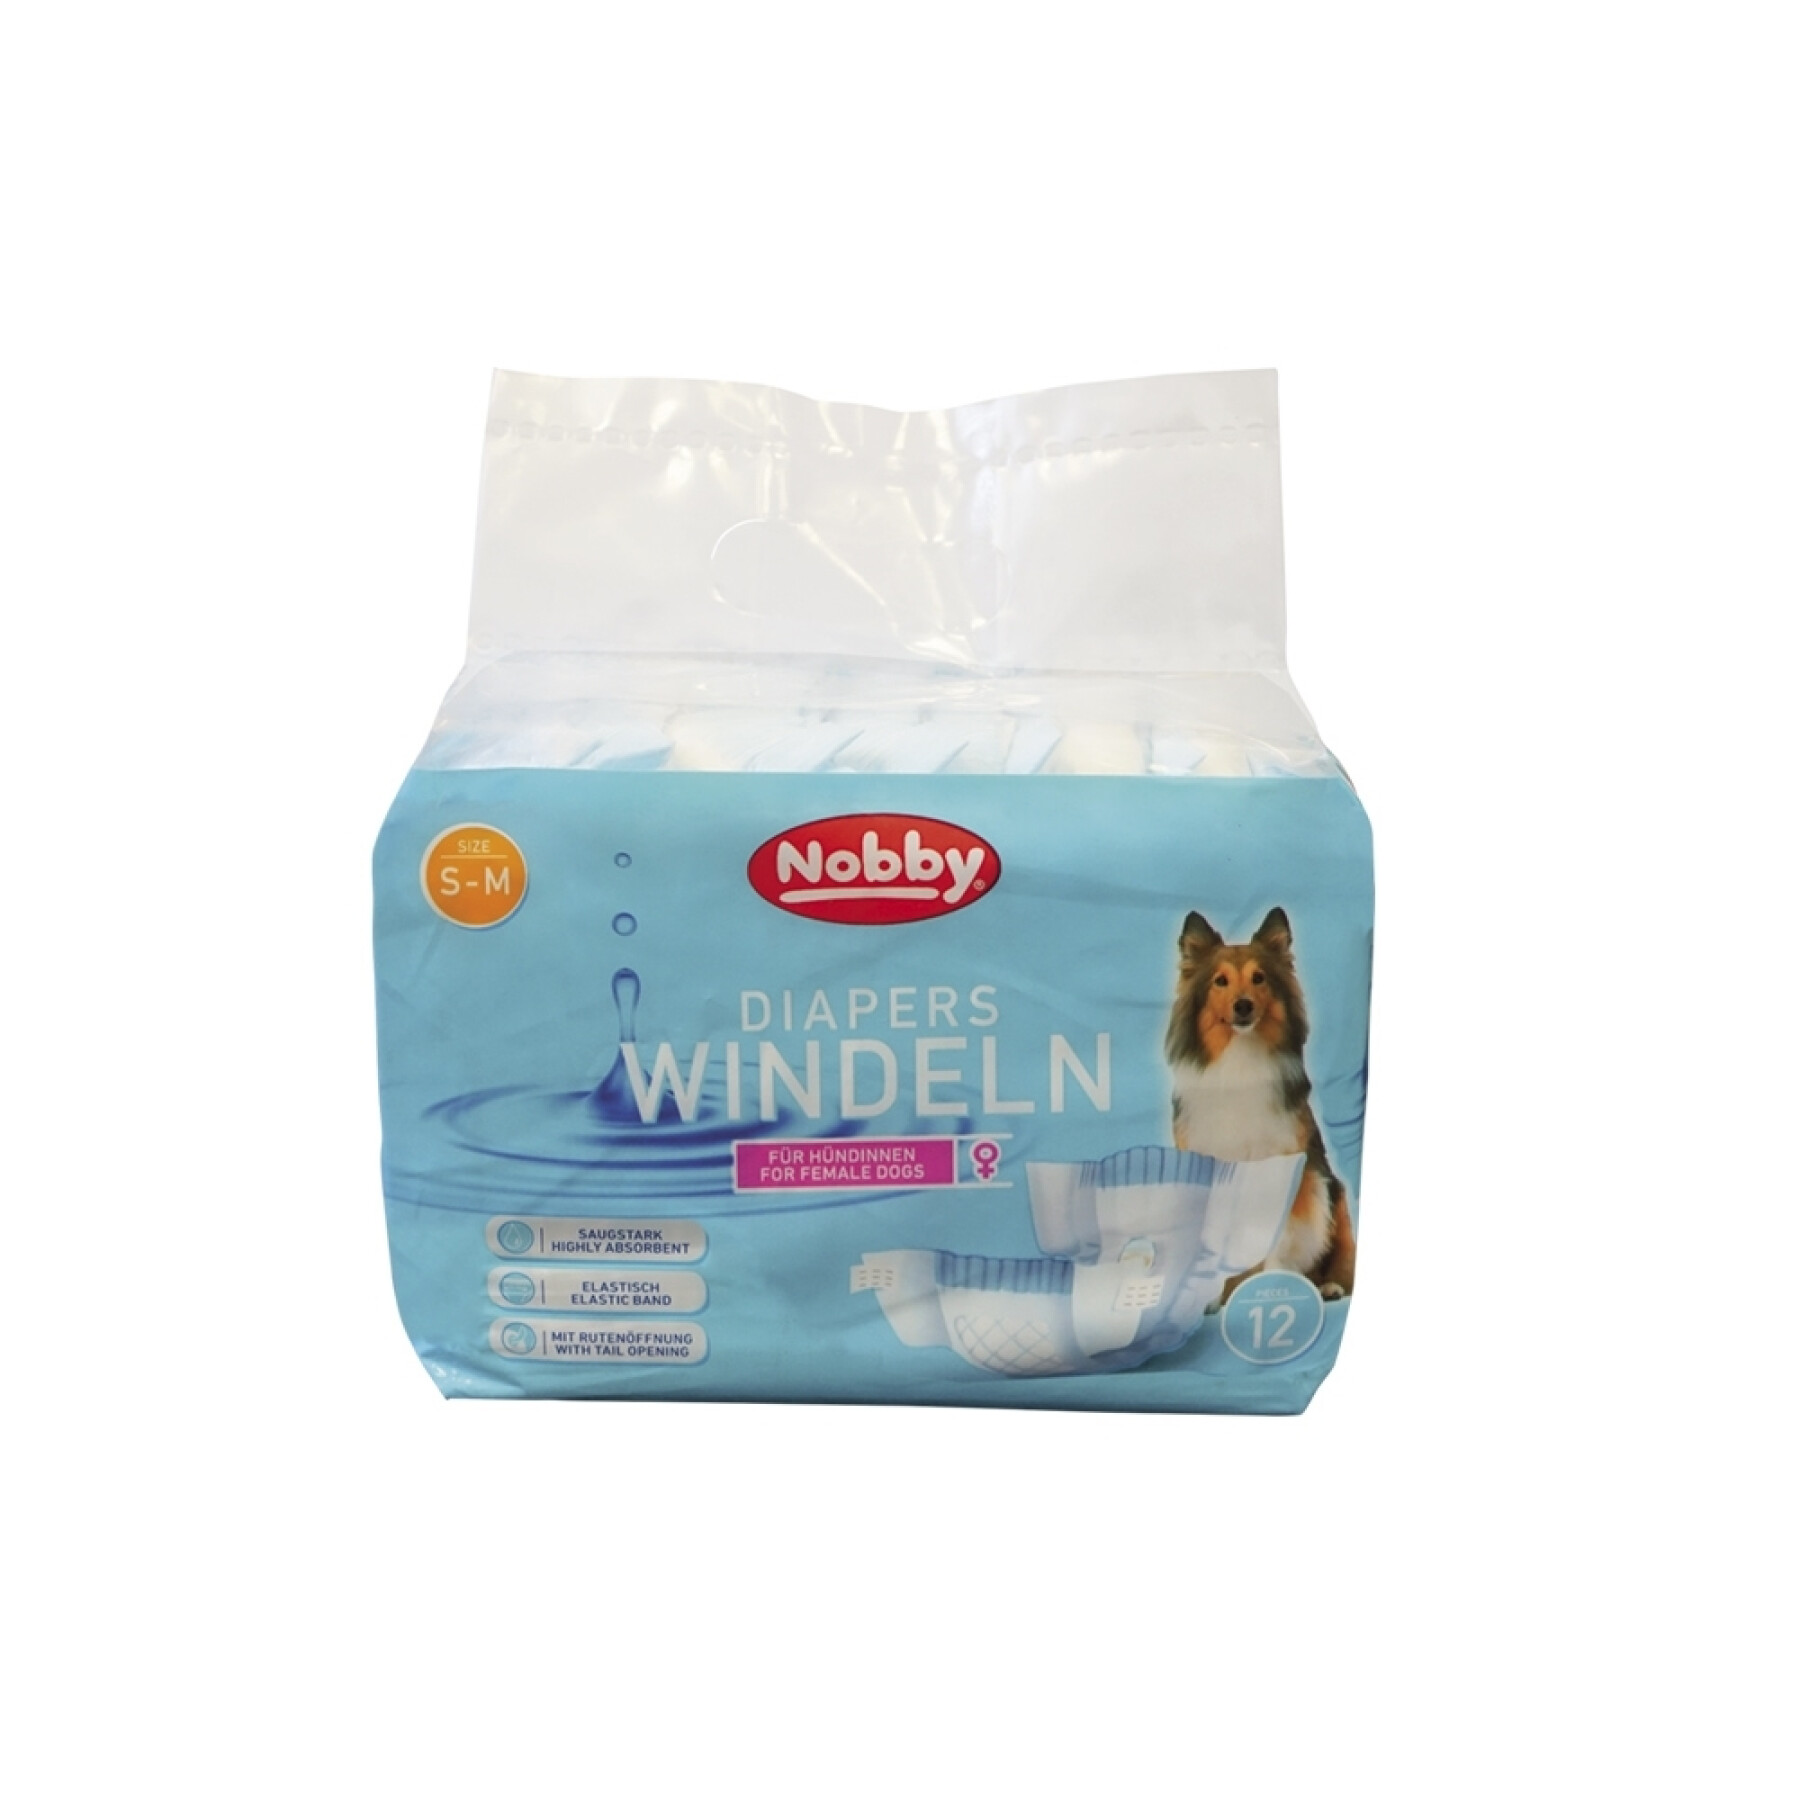 Pack of 12 female dog diapers Nobby Pet